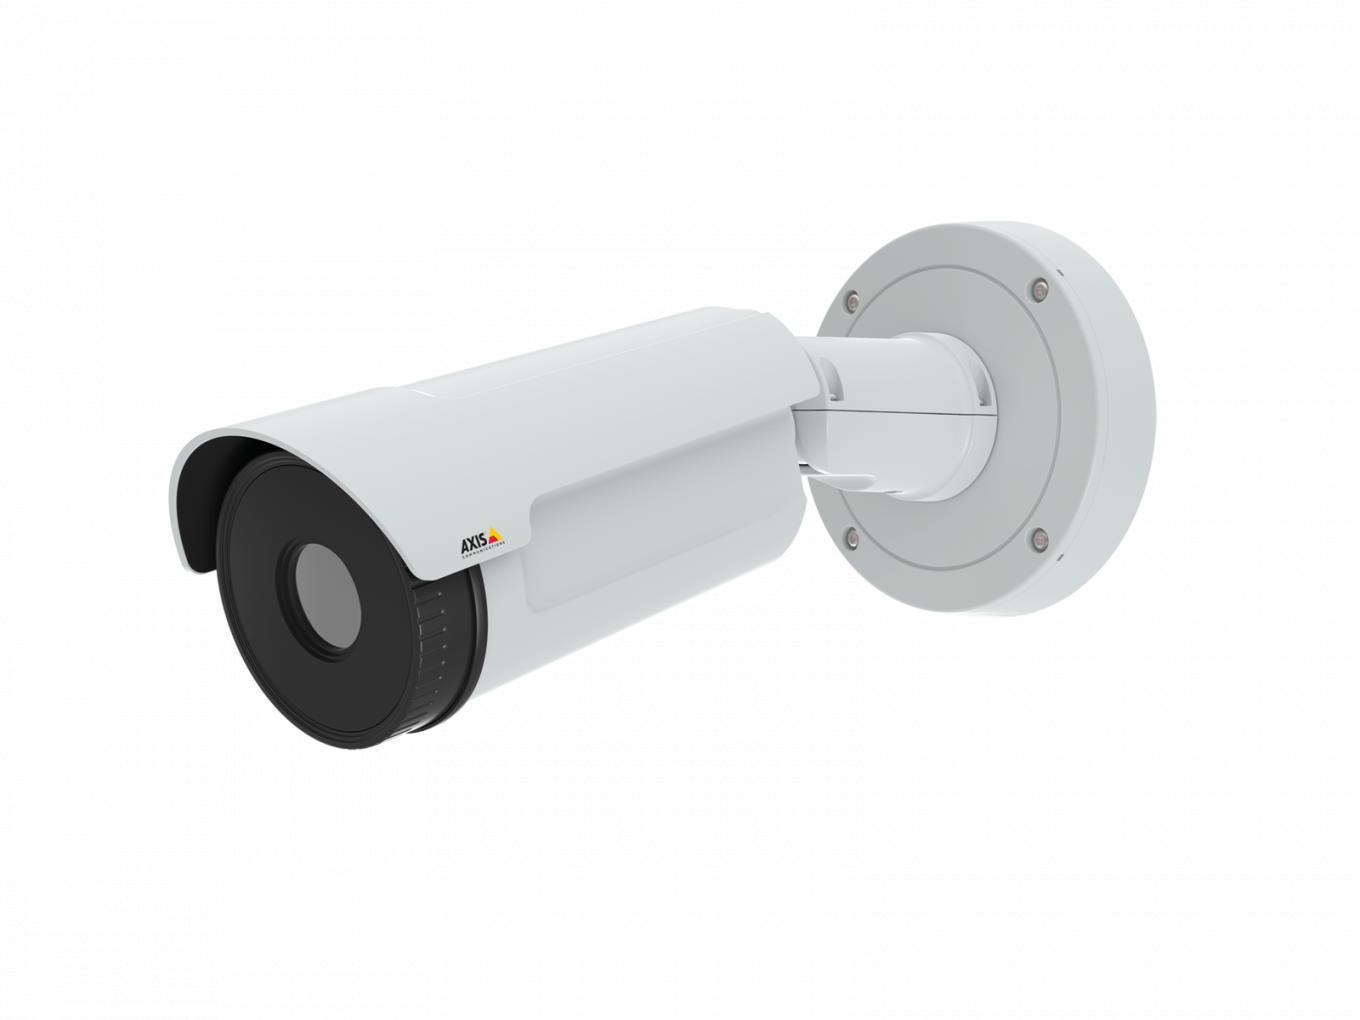 AXIS Q1941-E Thermal IP Camera mounted on wall from left